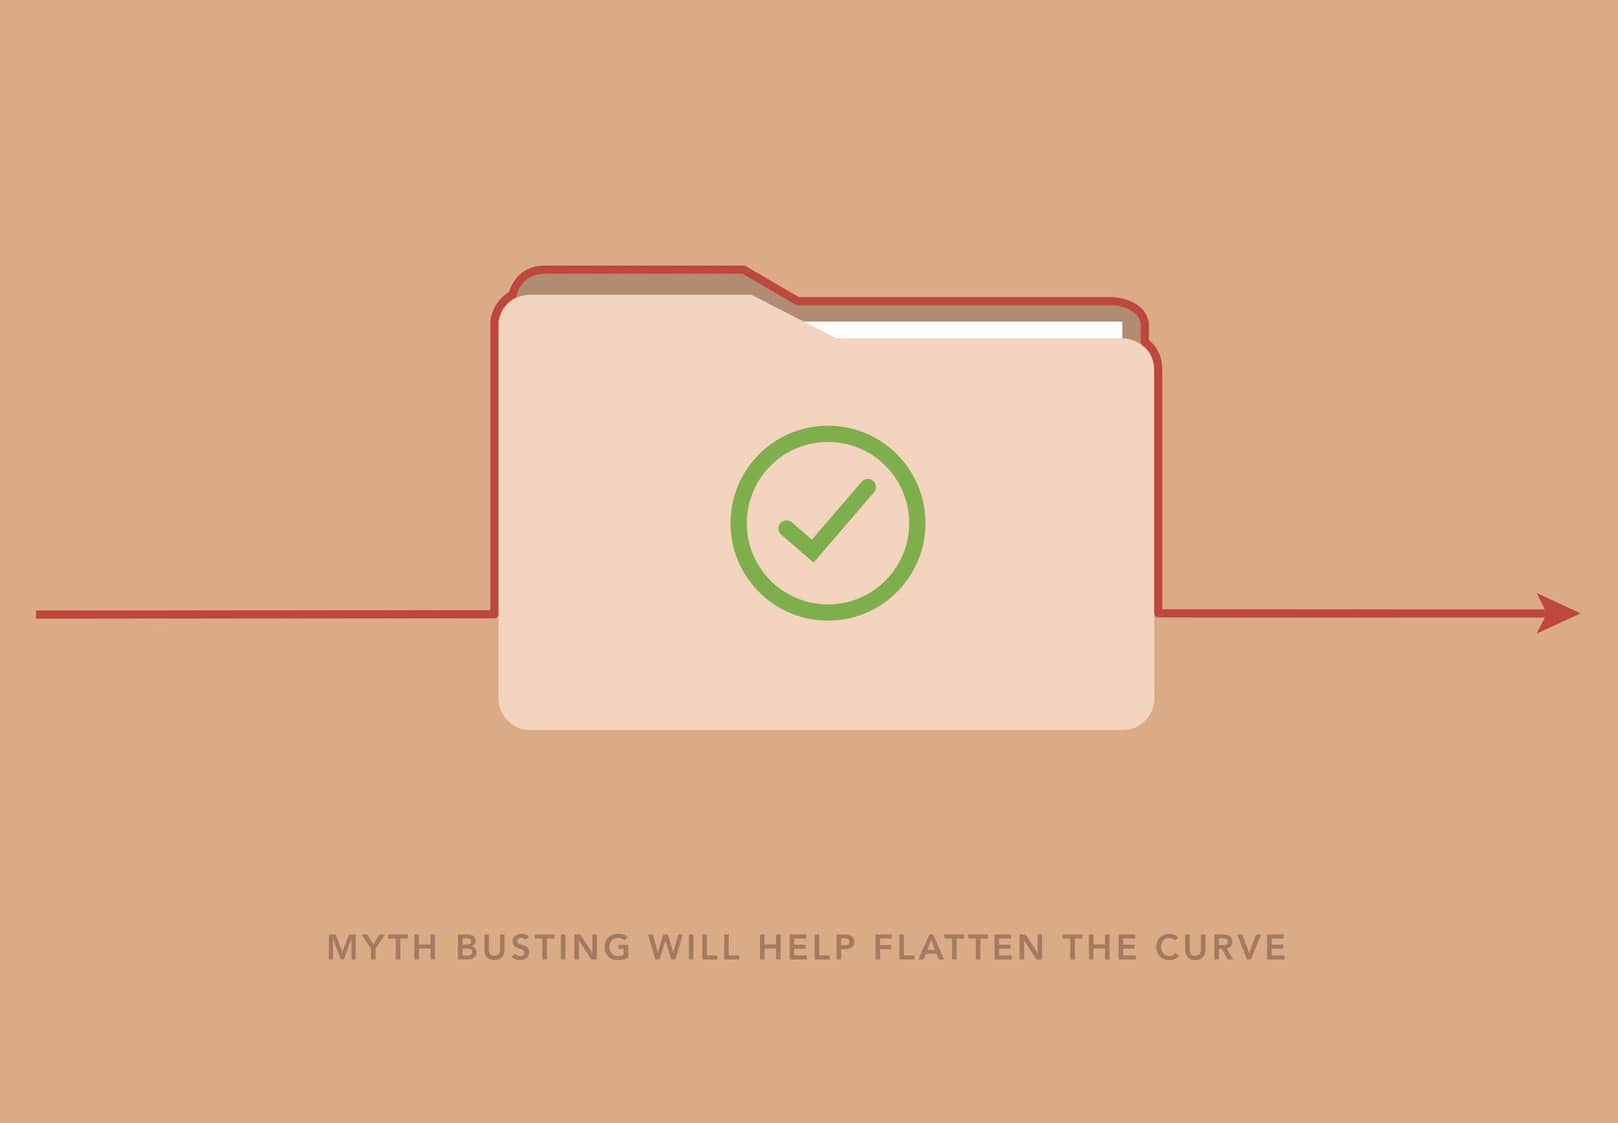 Mythbusting will help flatten the curve